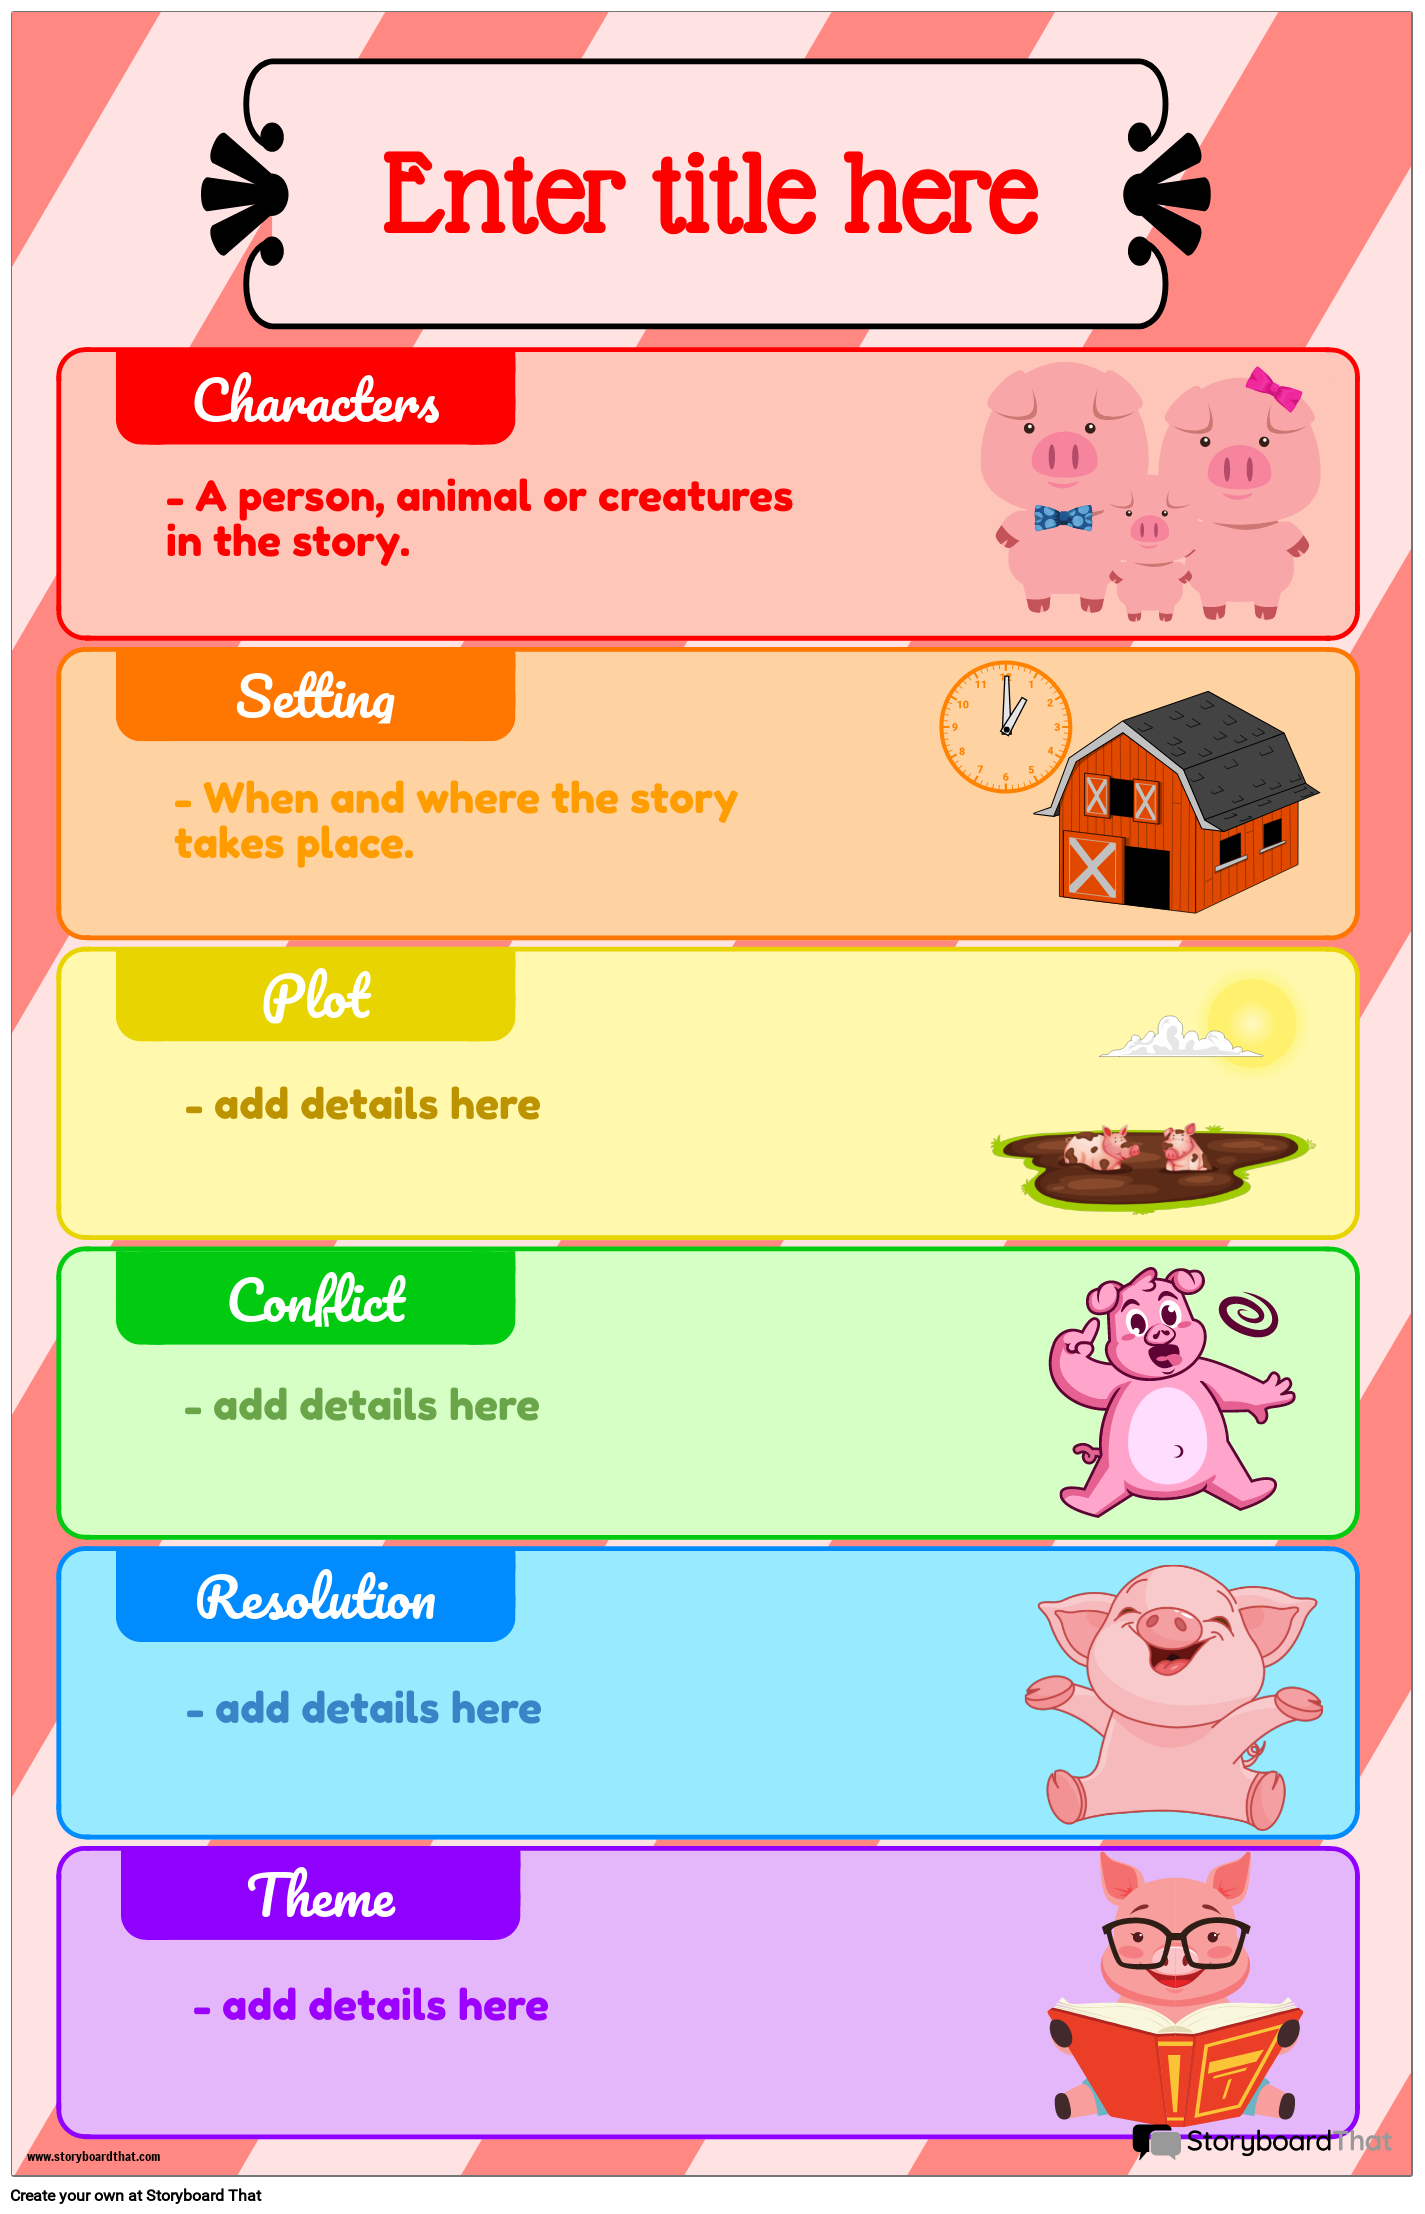 Pig-themed Story poster